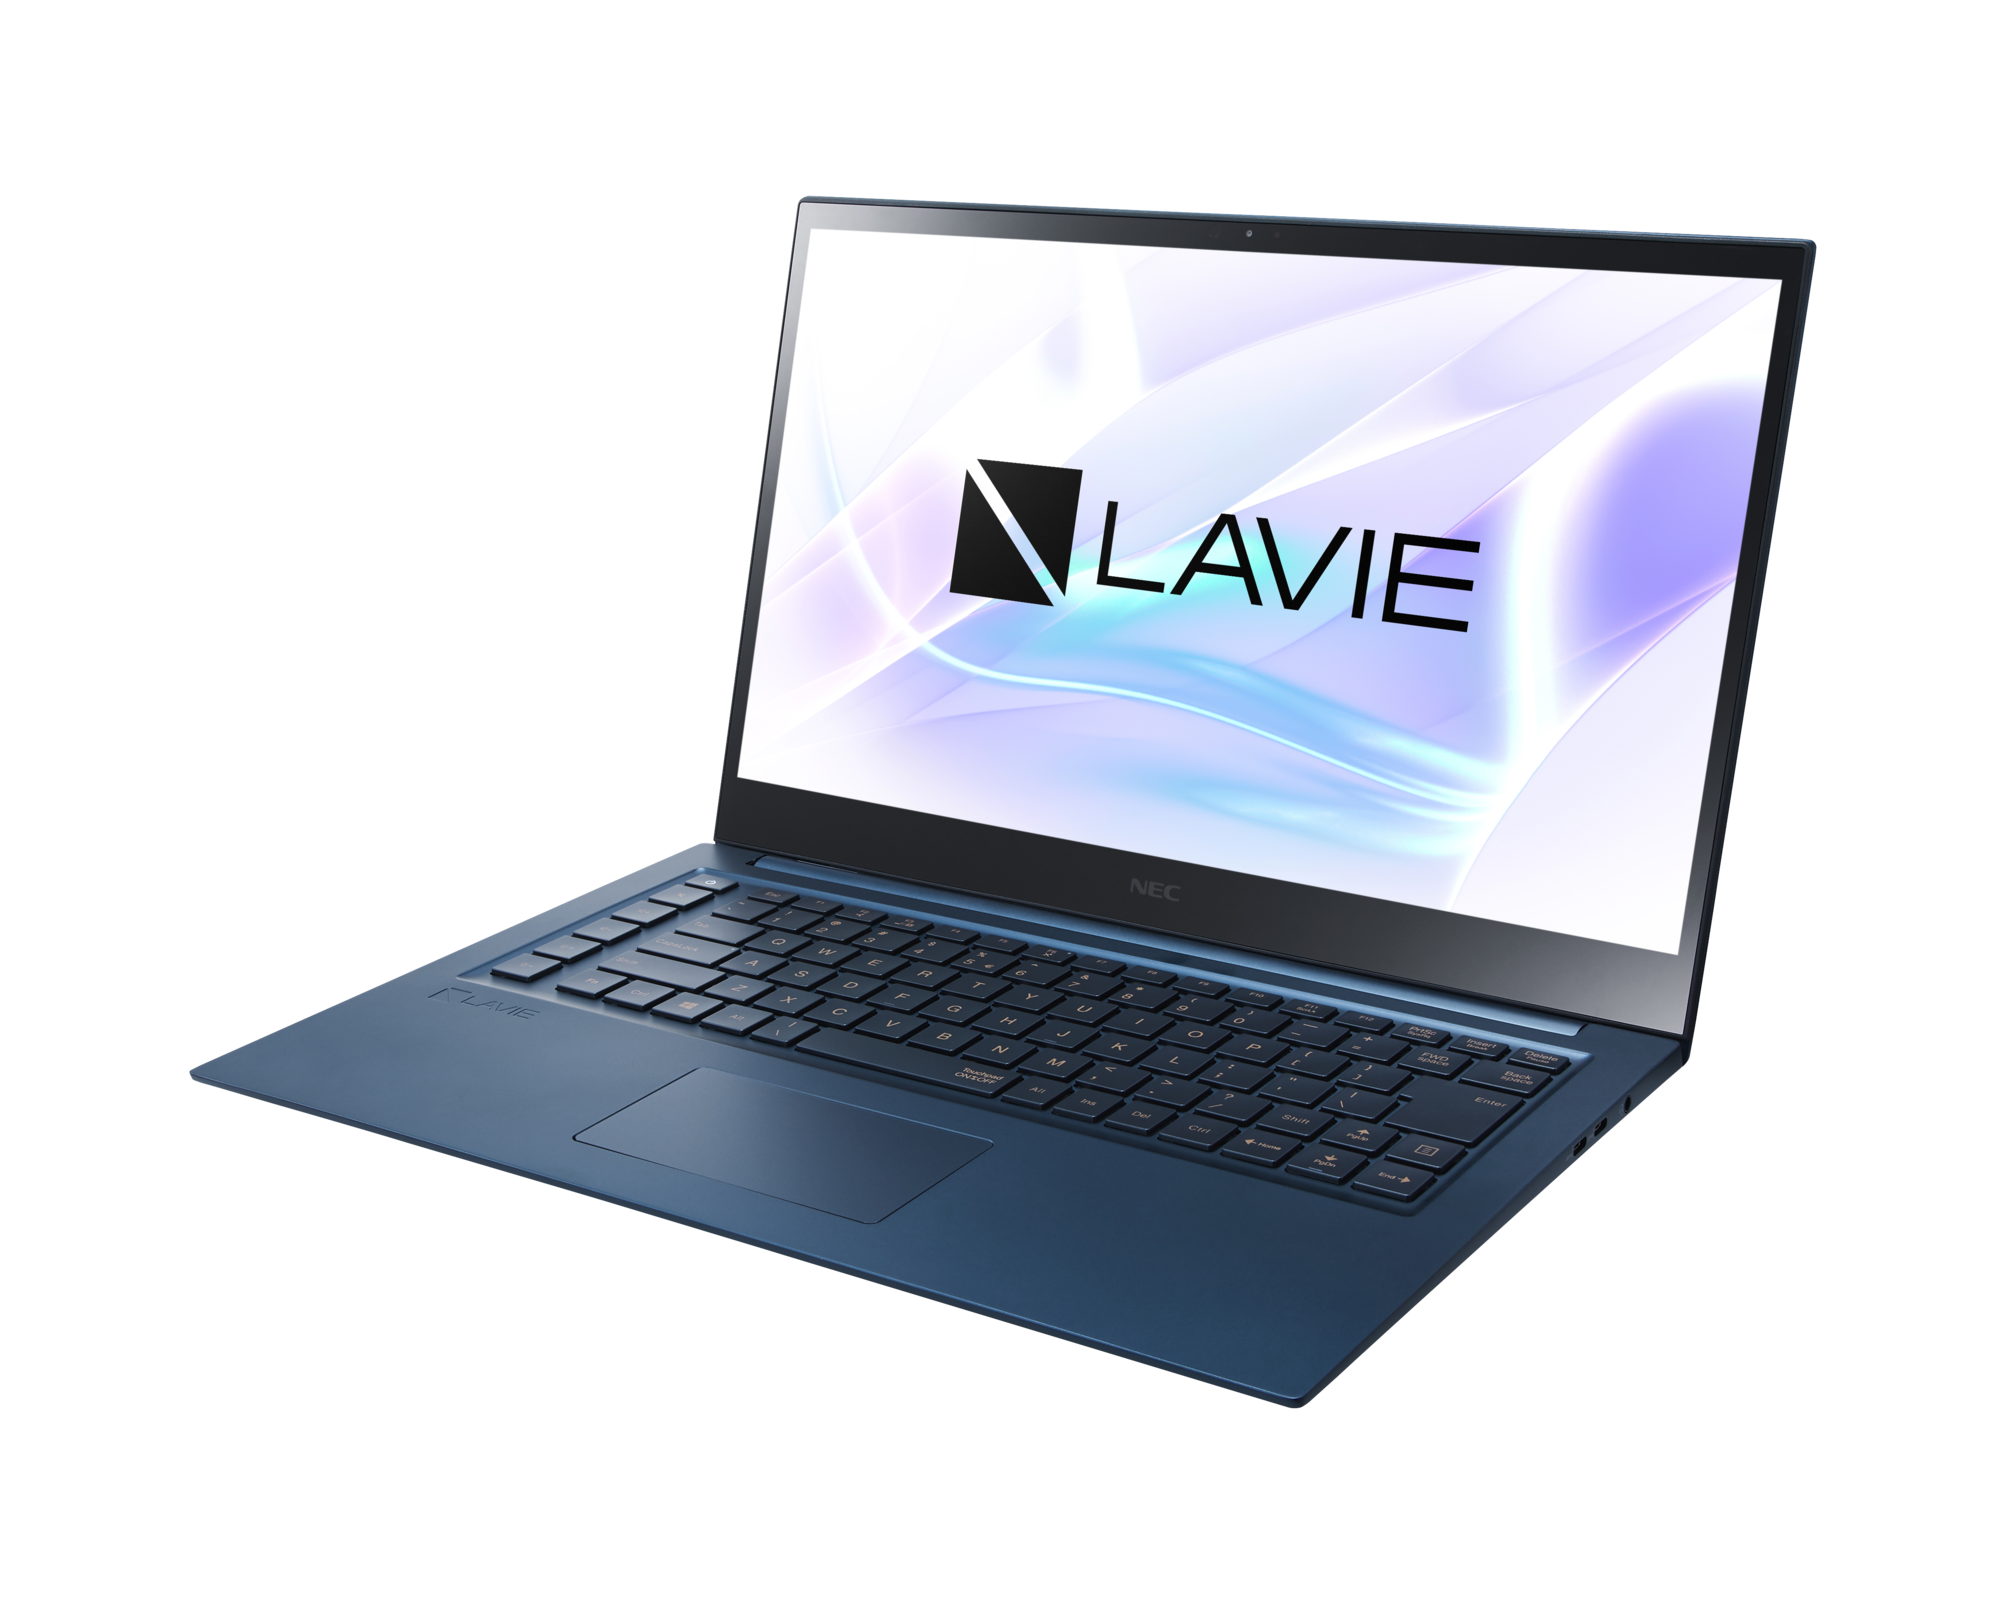 The NEC Lavie Vega is a thin-and-light 4K laptop aimed at business 